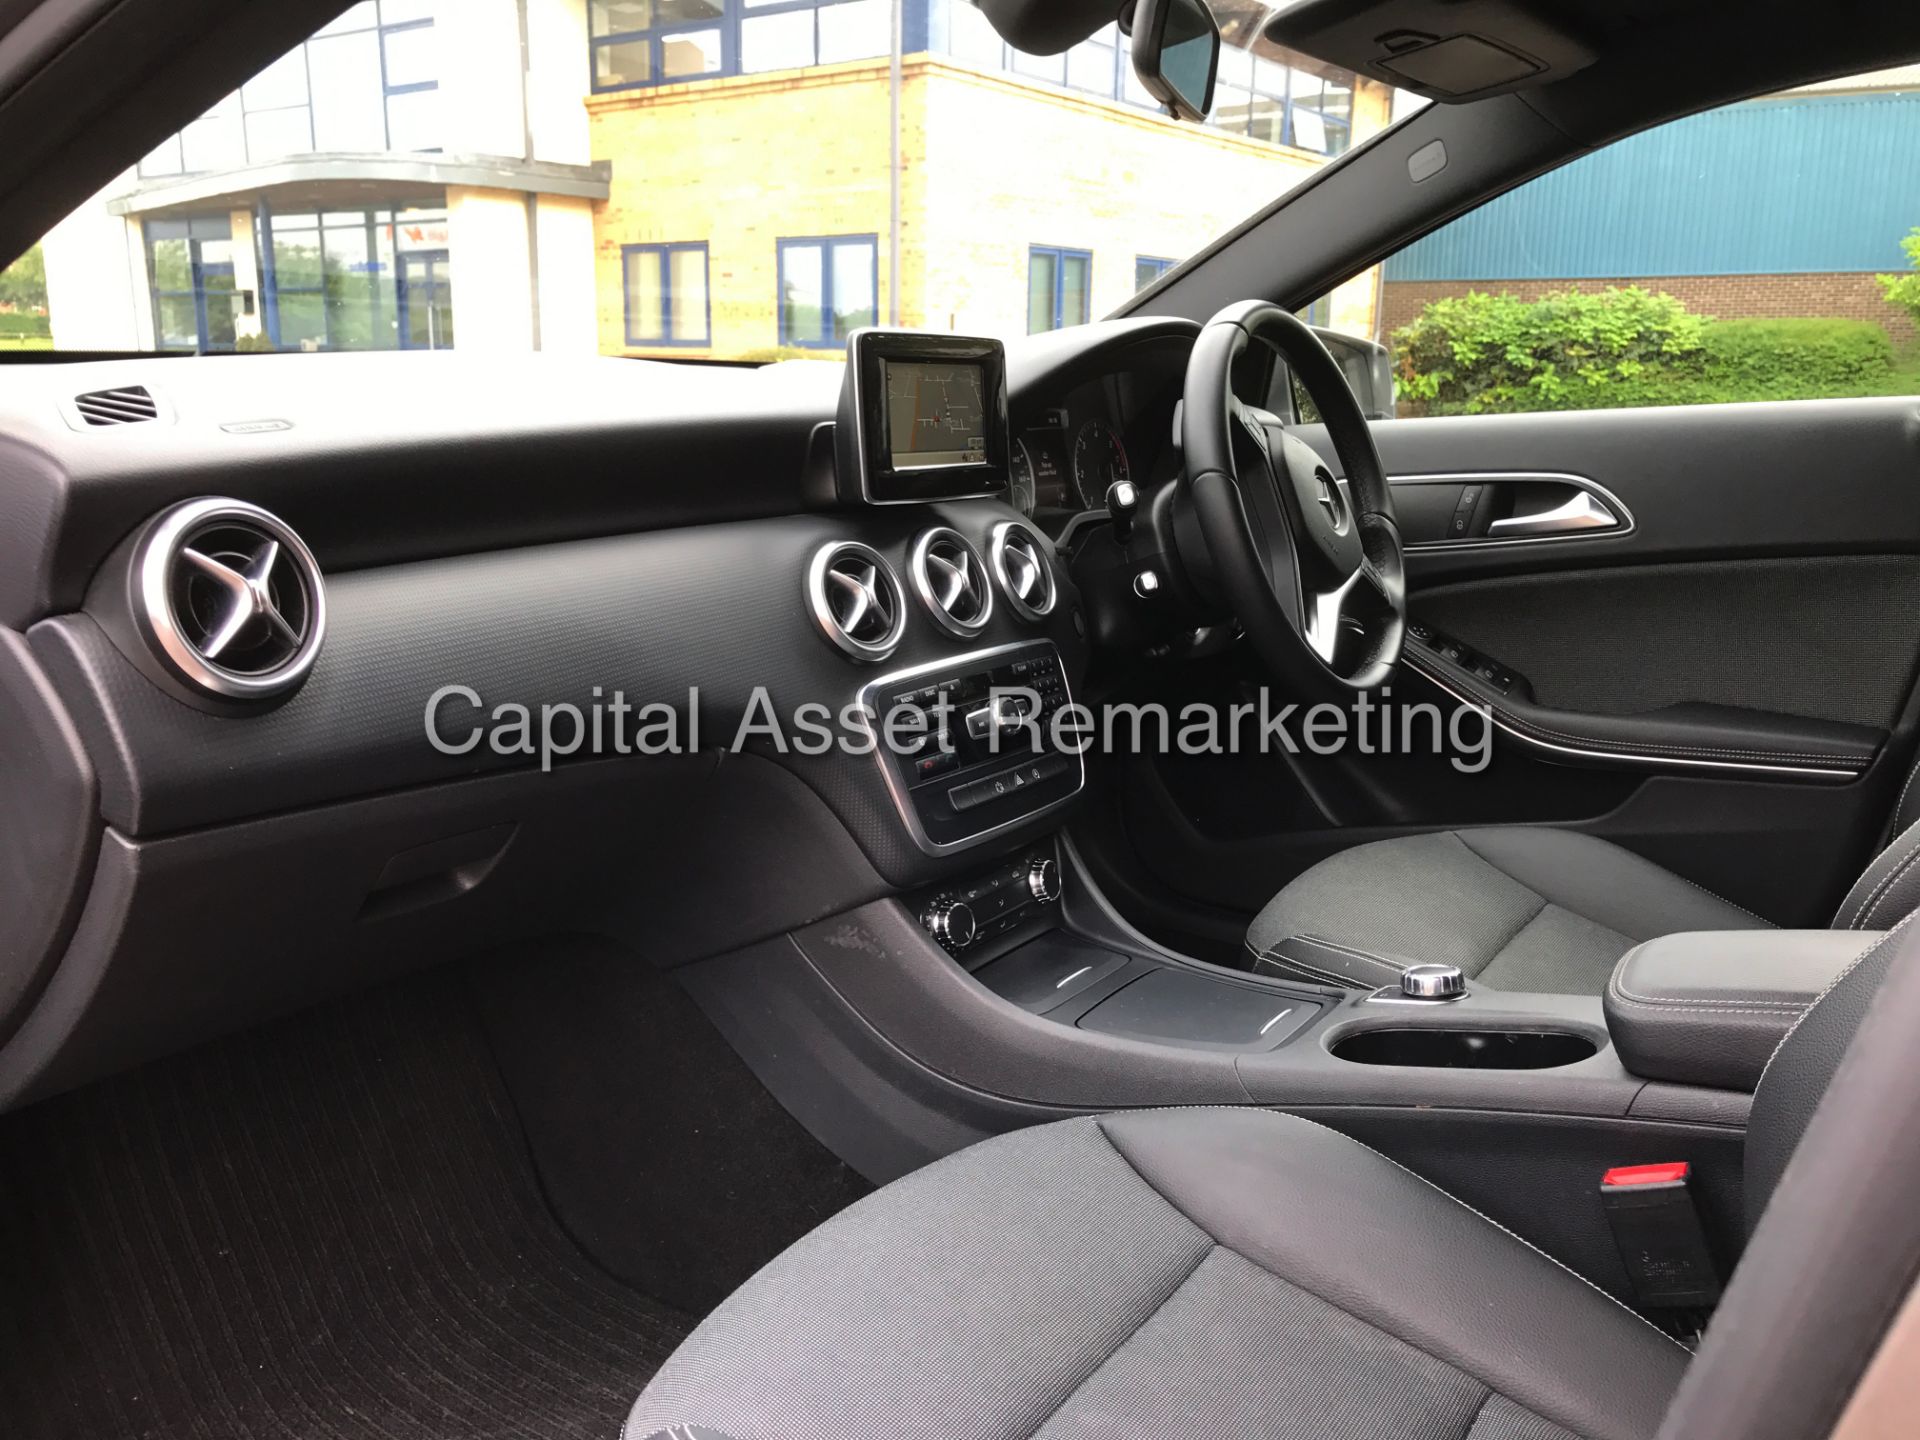 (ON SALE) MERCEDES A180d 7G TRONIC "15 REG" SAT NAV - 1 OWNER - PADDEL SHIFT - CRUISE - AIR CON - Image 14 of 22